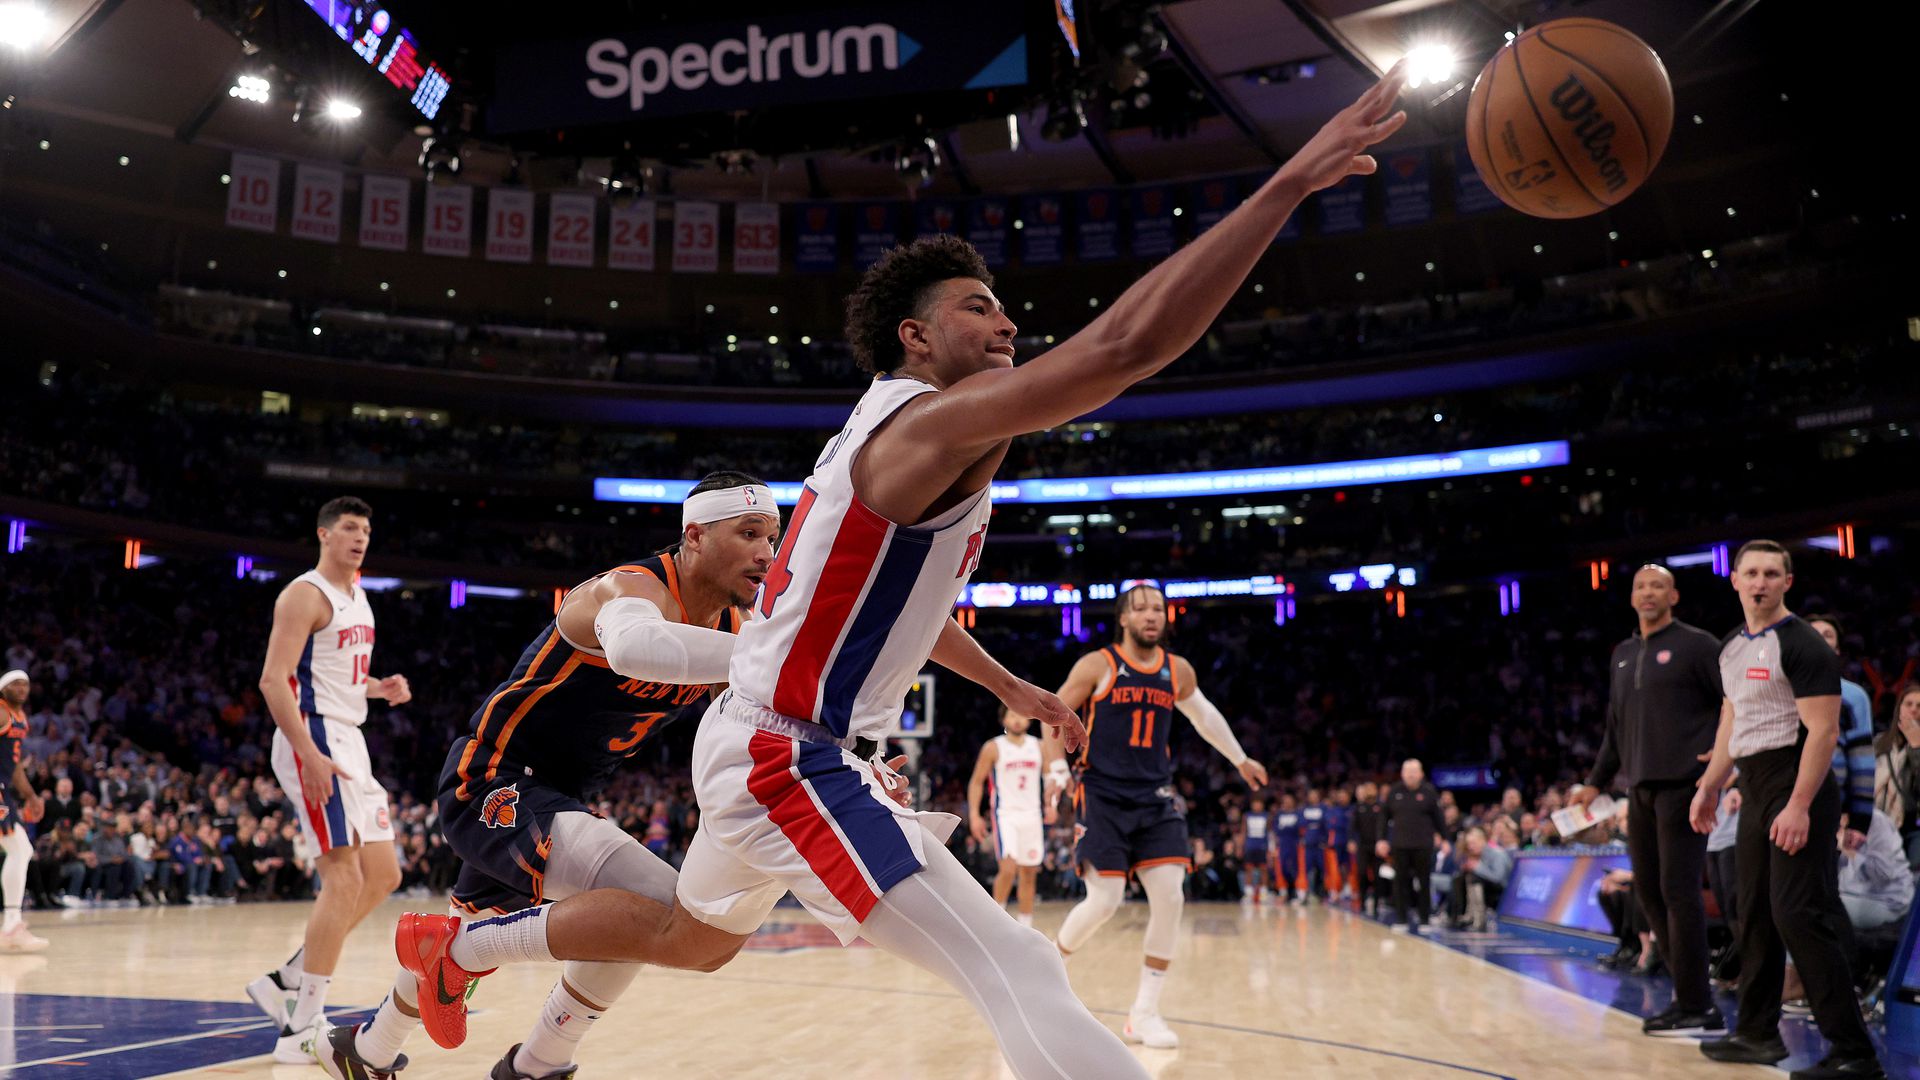 knicks’ chaotic, controversial win over pistons included refs admitting mistake, monty williams rant